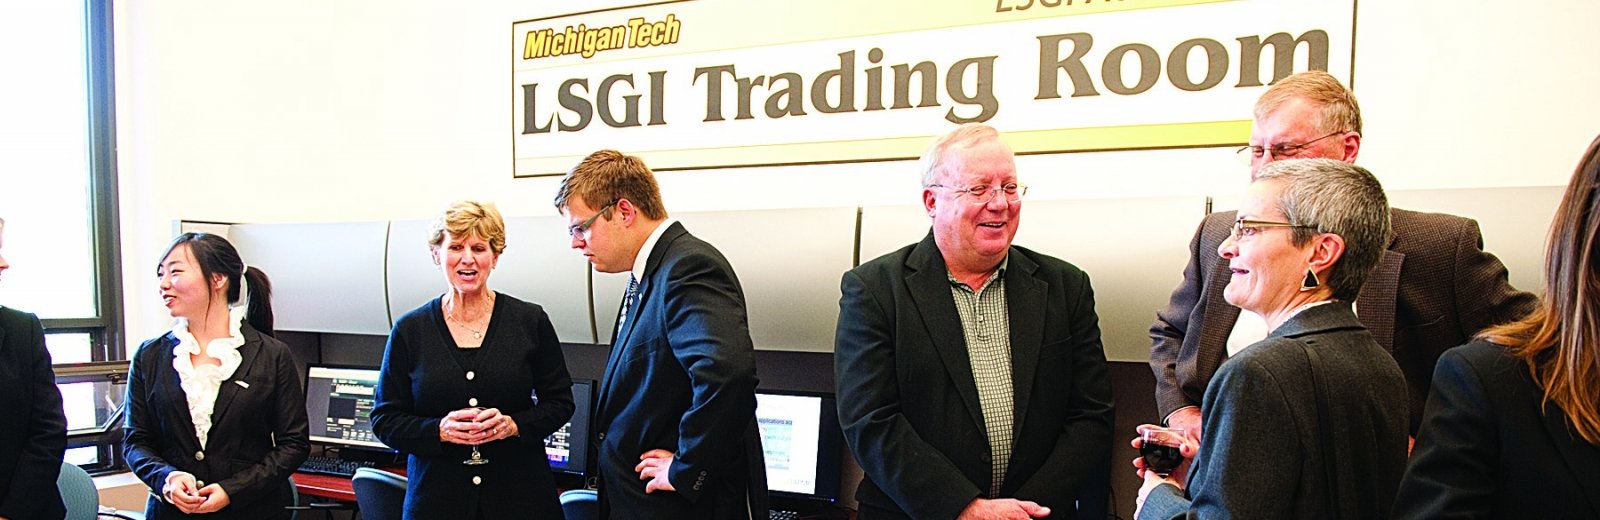 people at the opening of the LSGI Trading Room